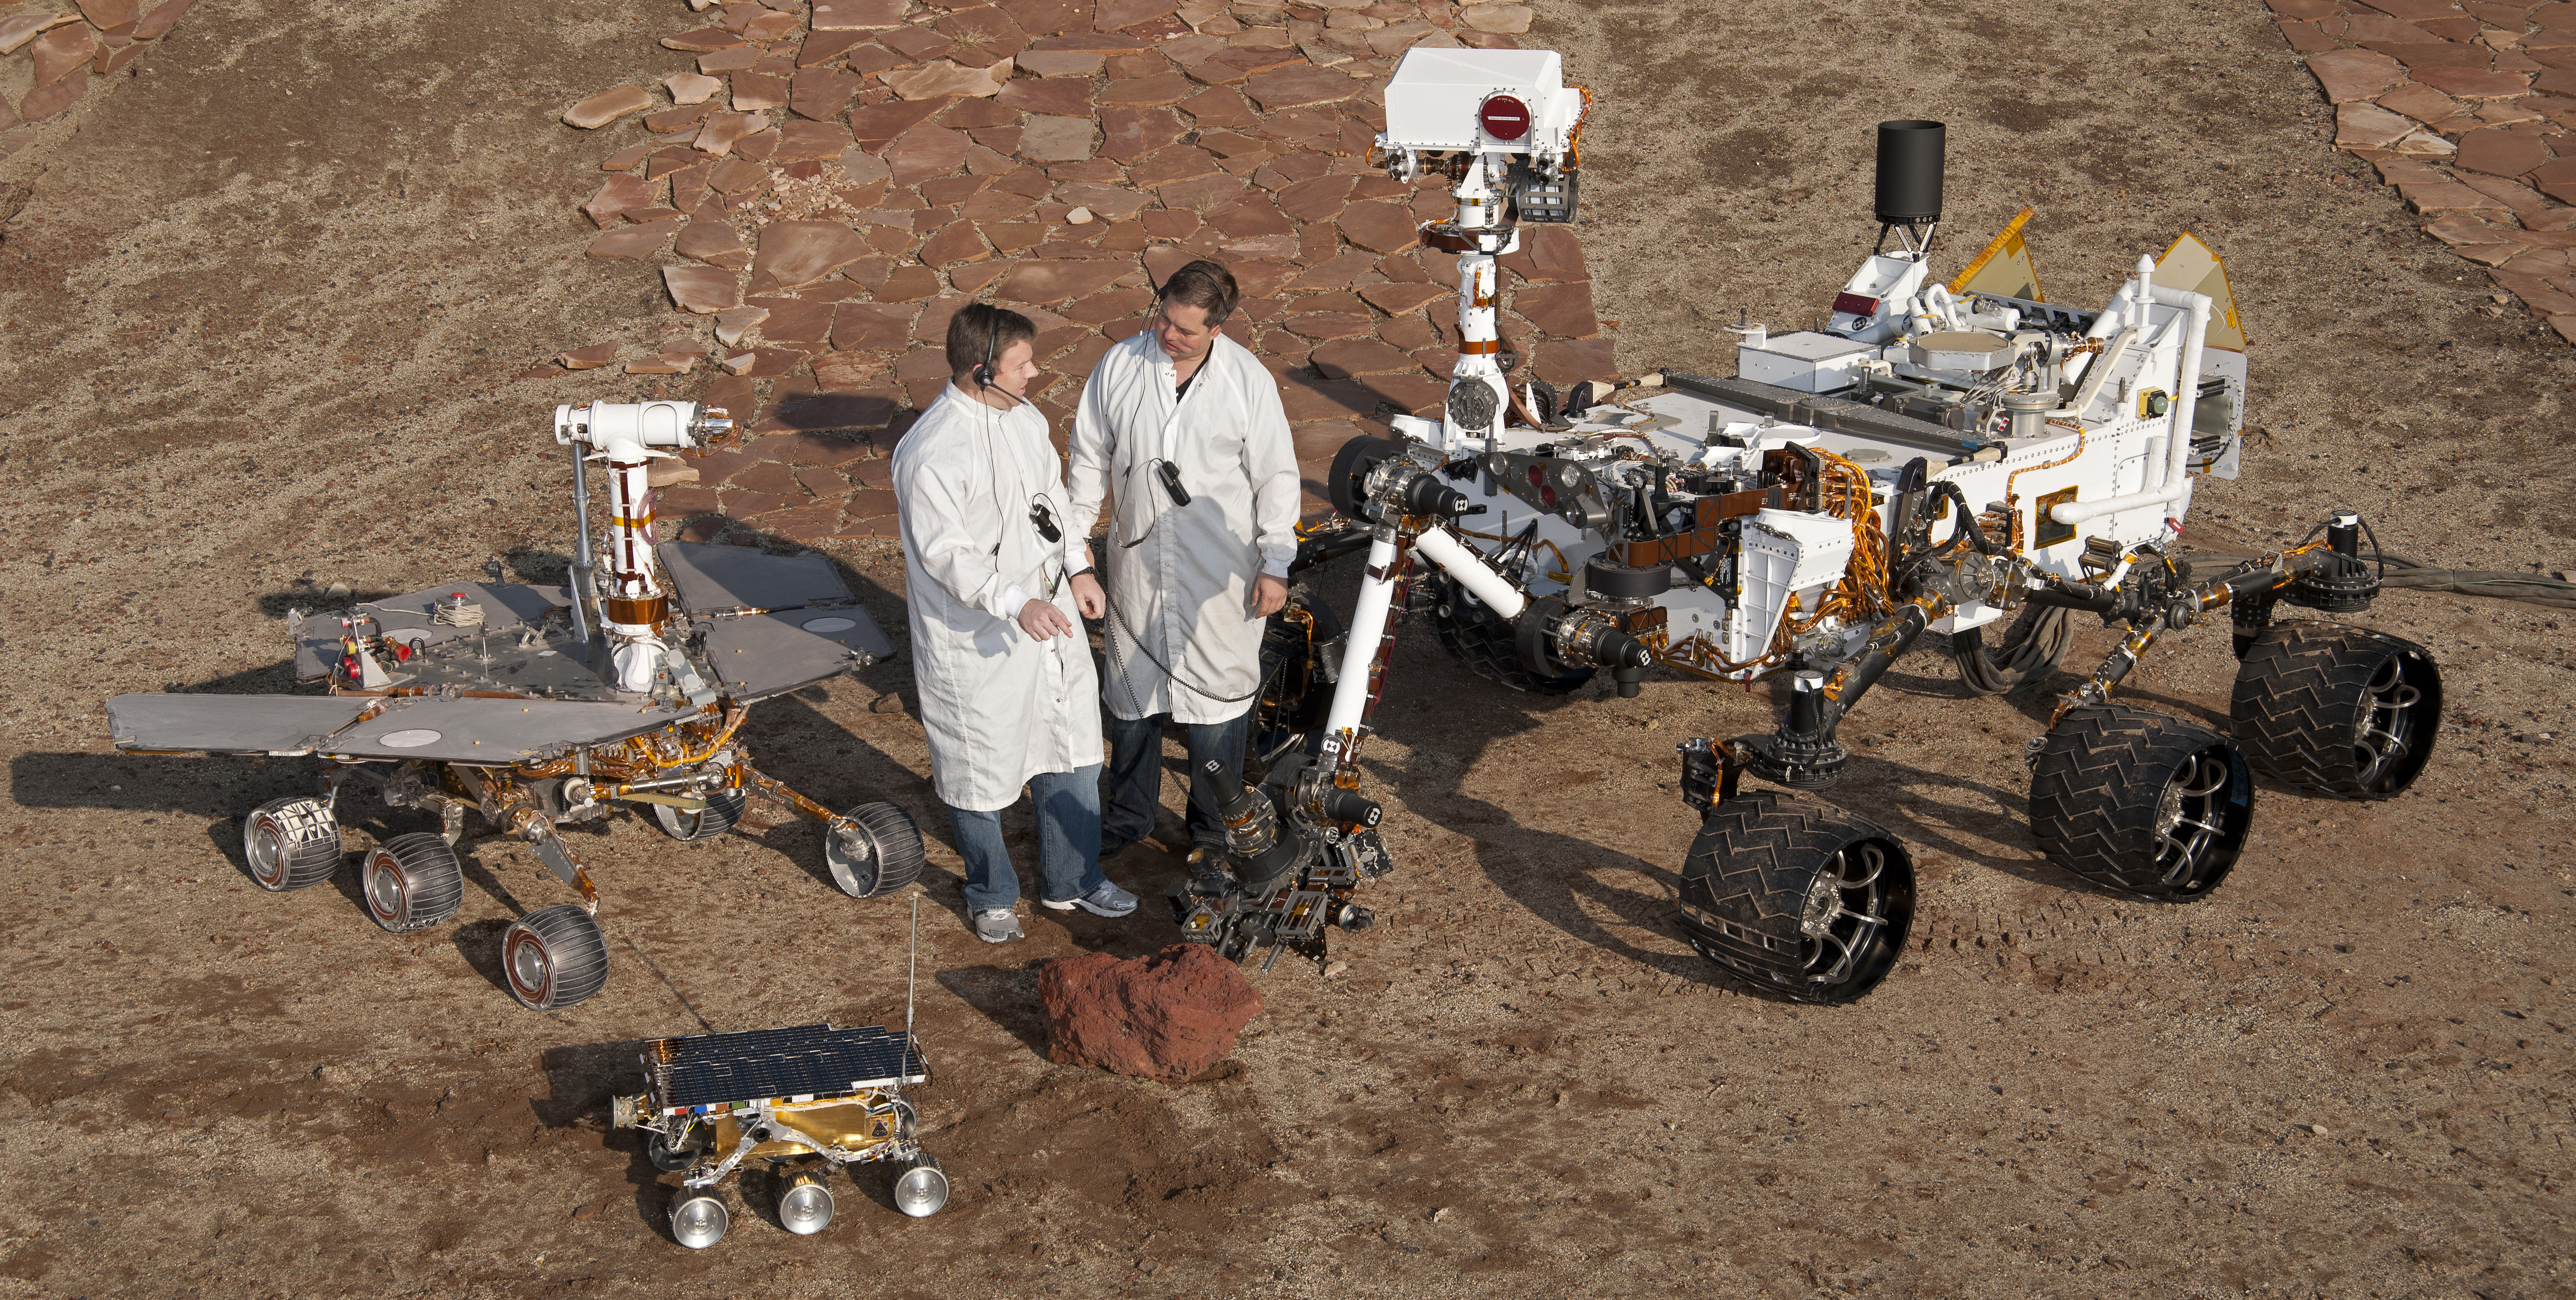 PIA15279_3rovers-stand_D2011_1215_D521.jpg